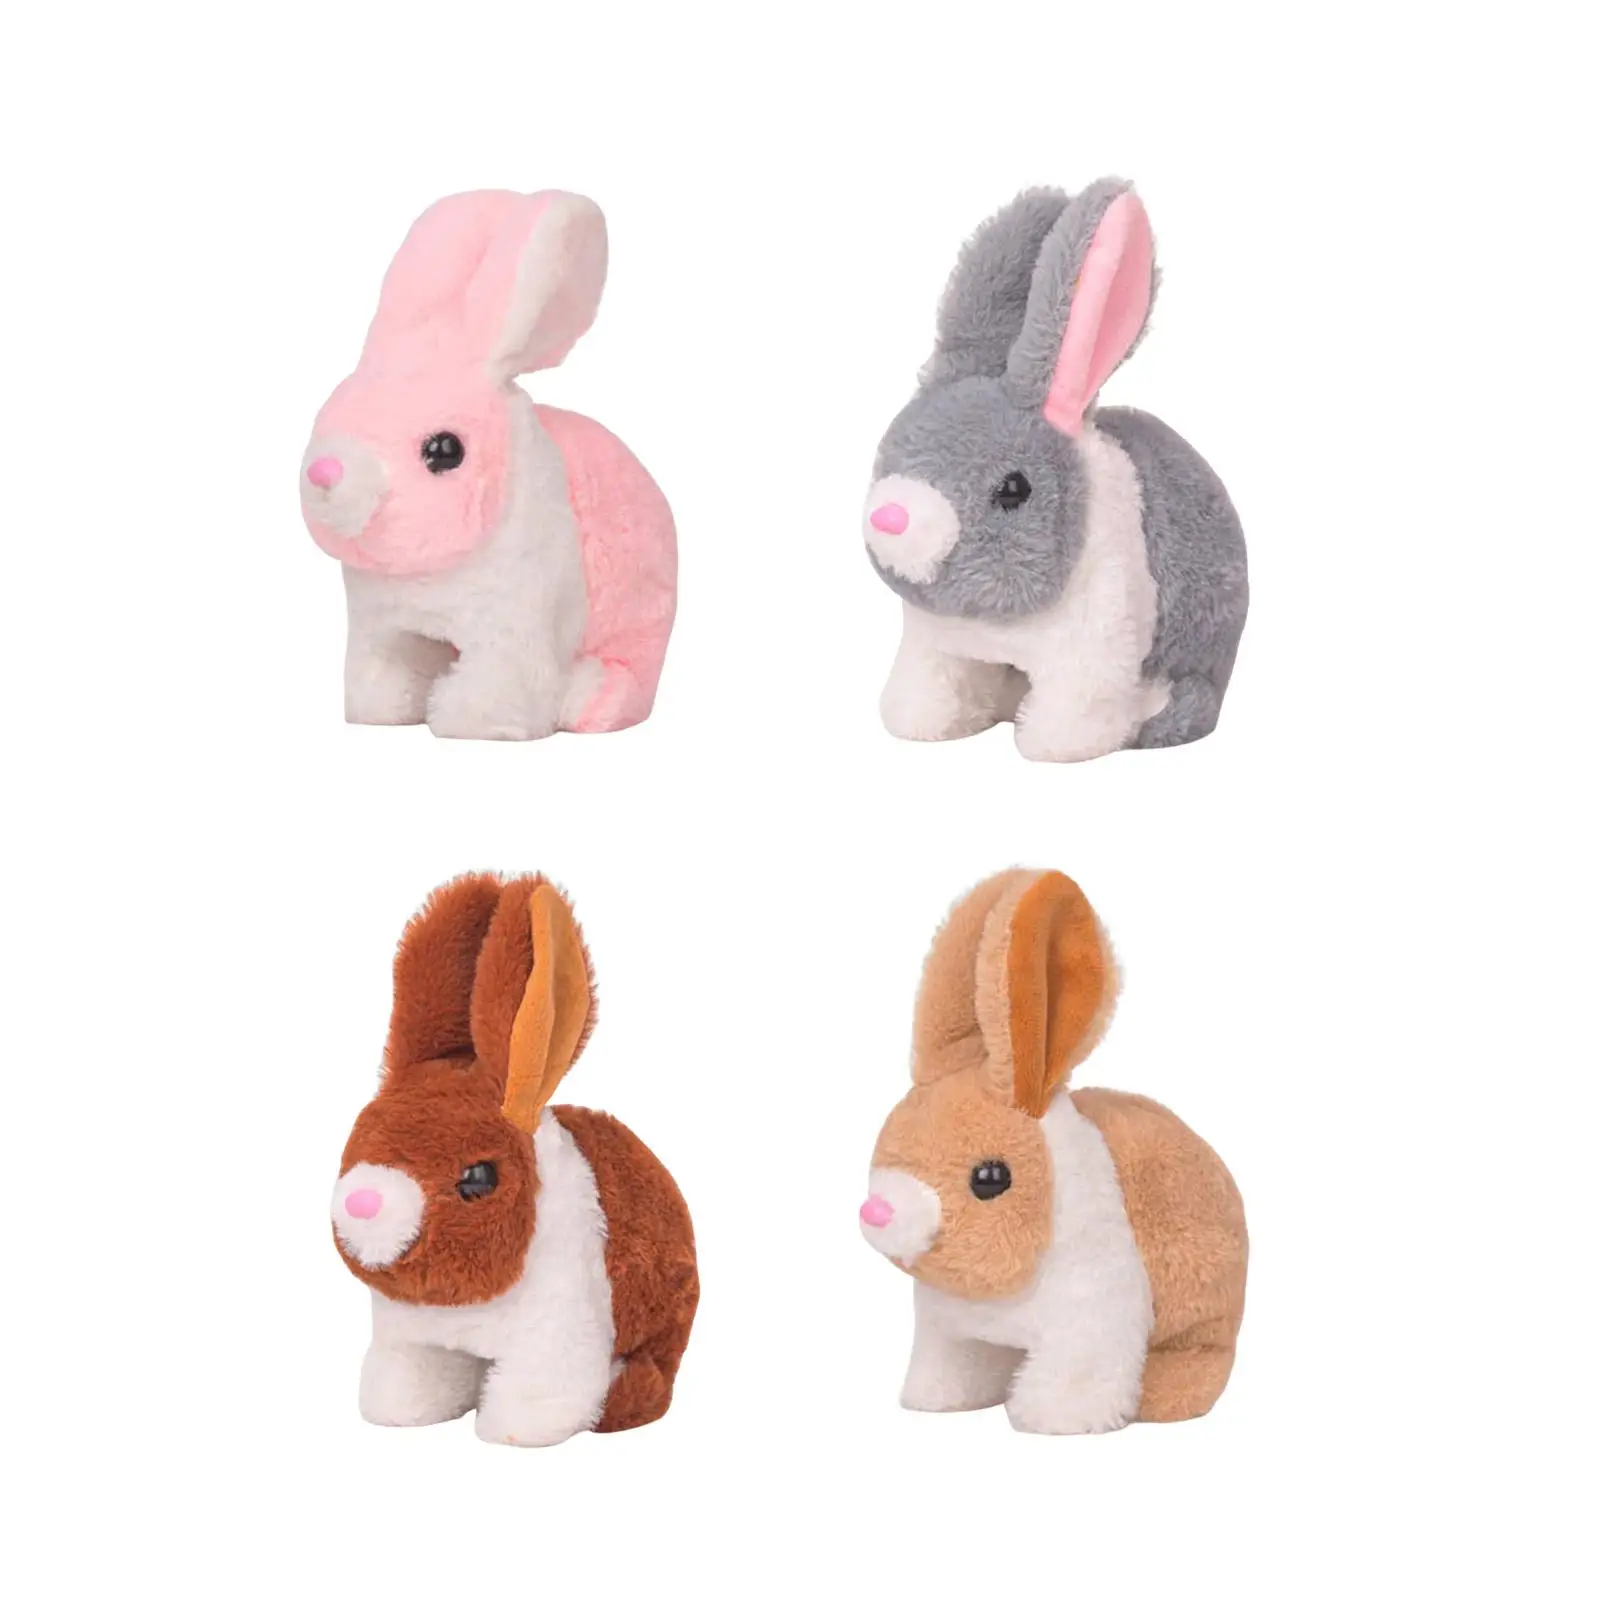 Electric Rabbit Toys Plush Toy, Stuffed Animal Wiggling Ears, Realistic, Early Education for Easter Holiday Kids Toy